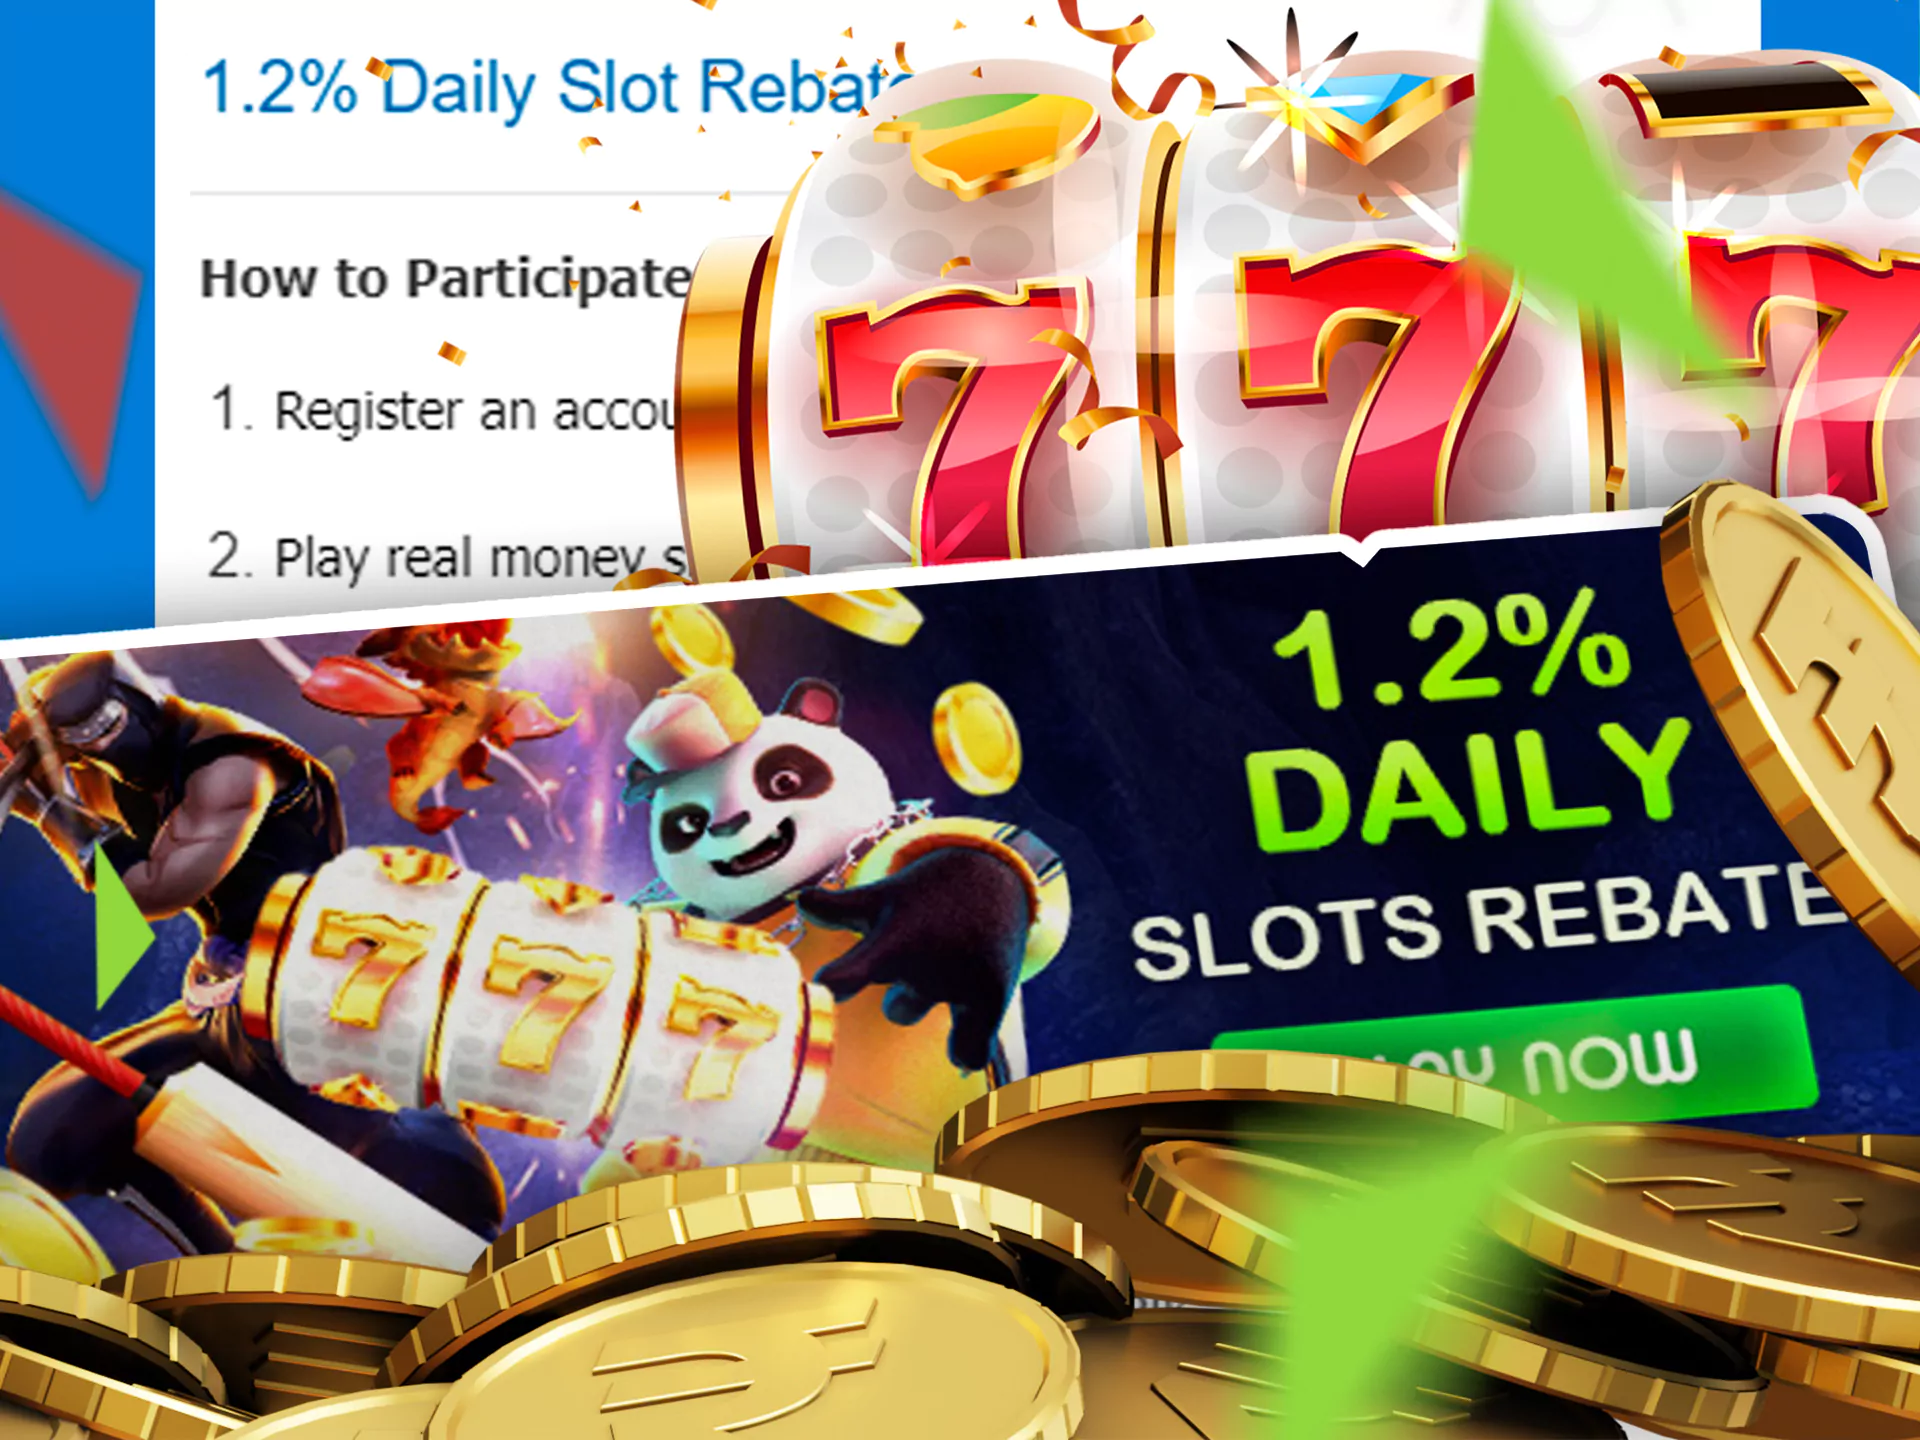 Check out the rules and get a rebate on playing slots.